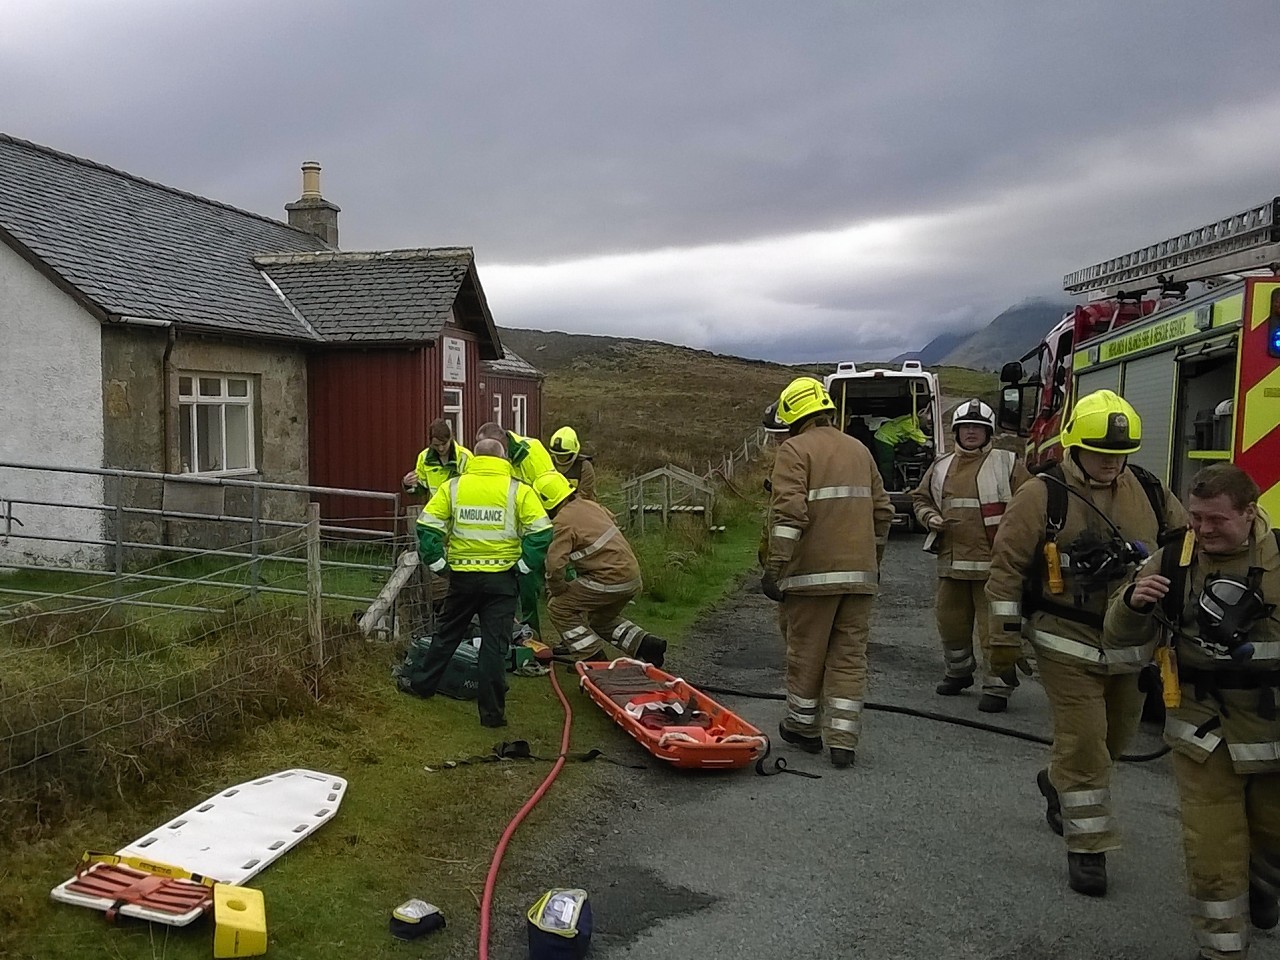 Skye firefighters taking part in a training exercise